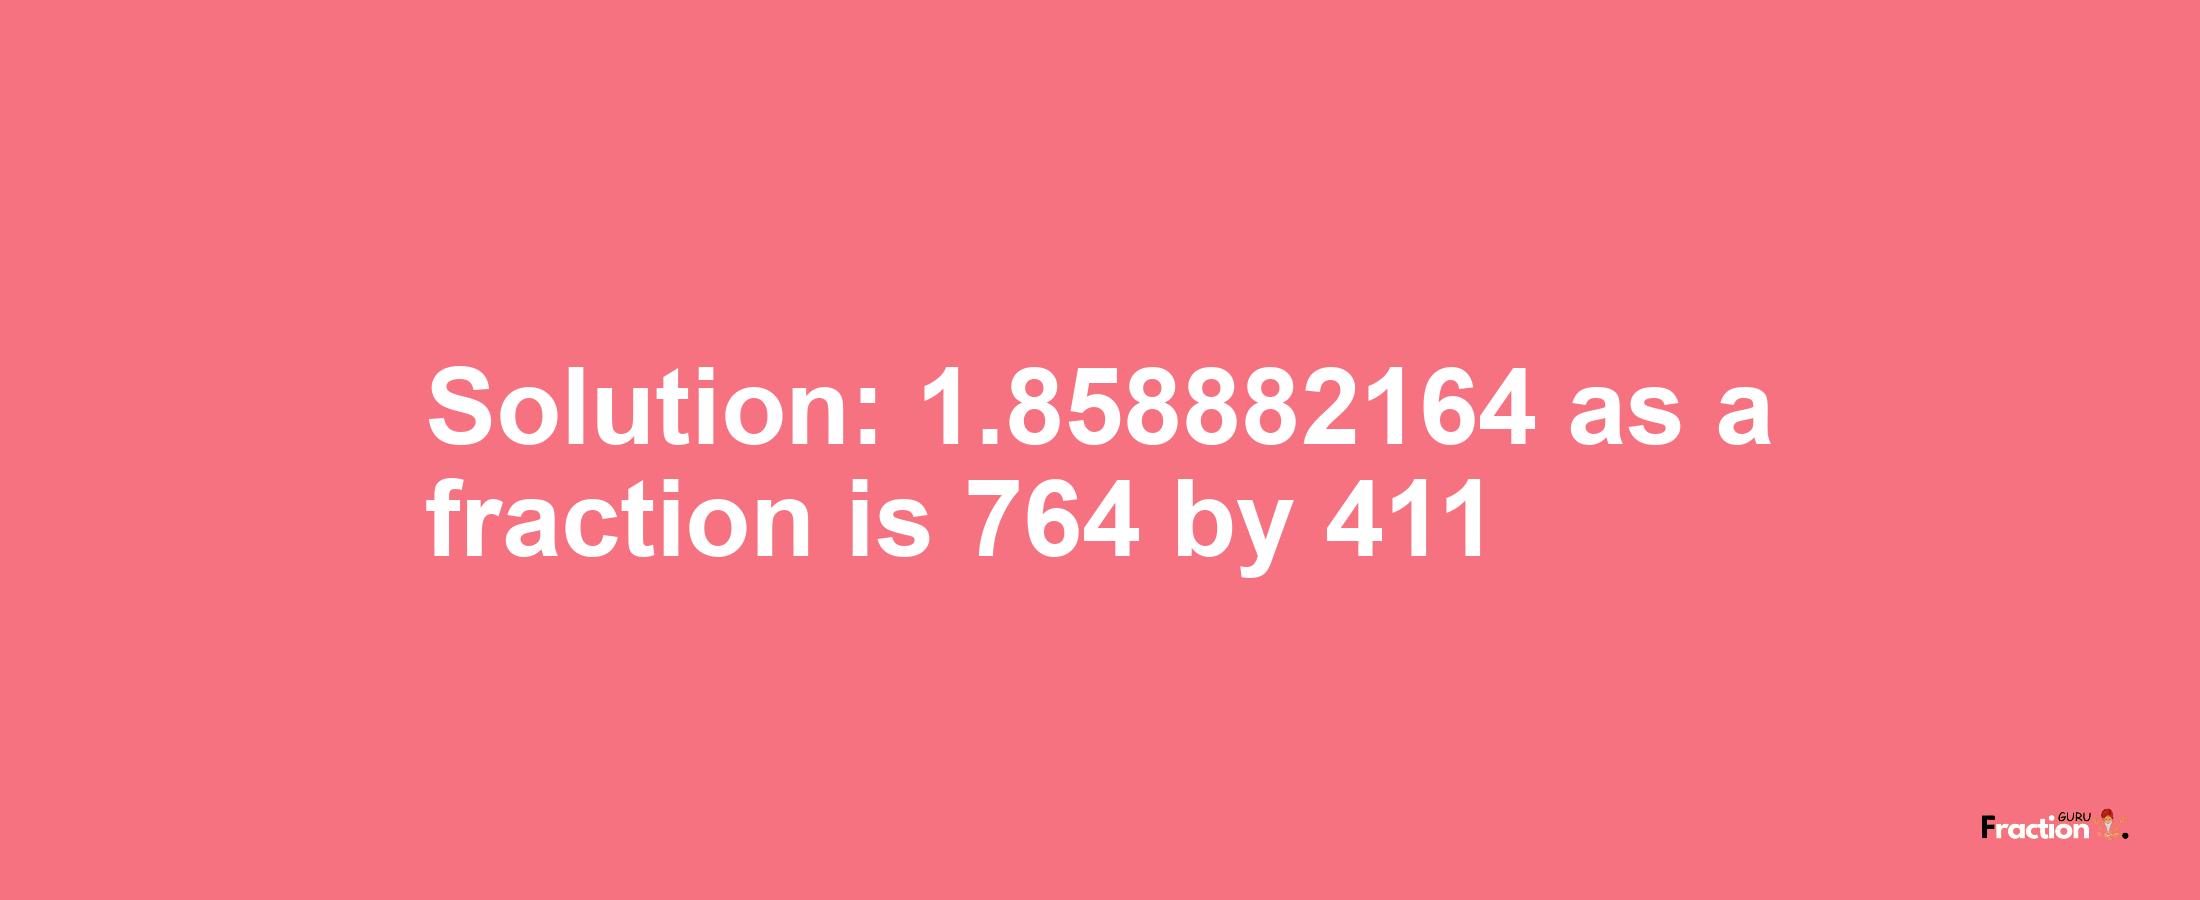 Solution:1.858882164 as a fraction is 764/411